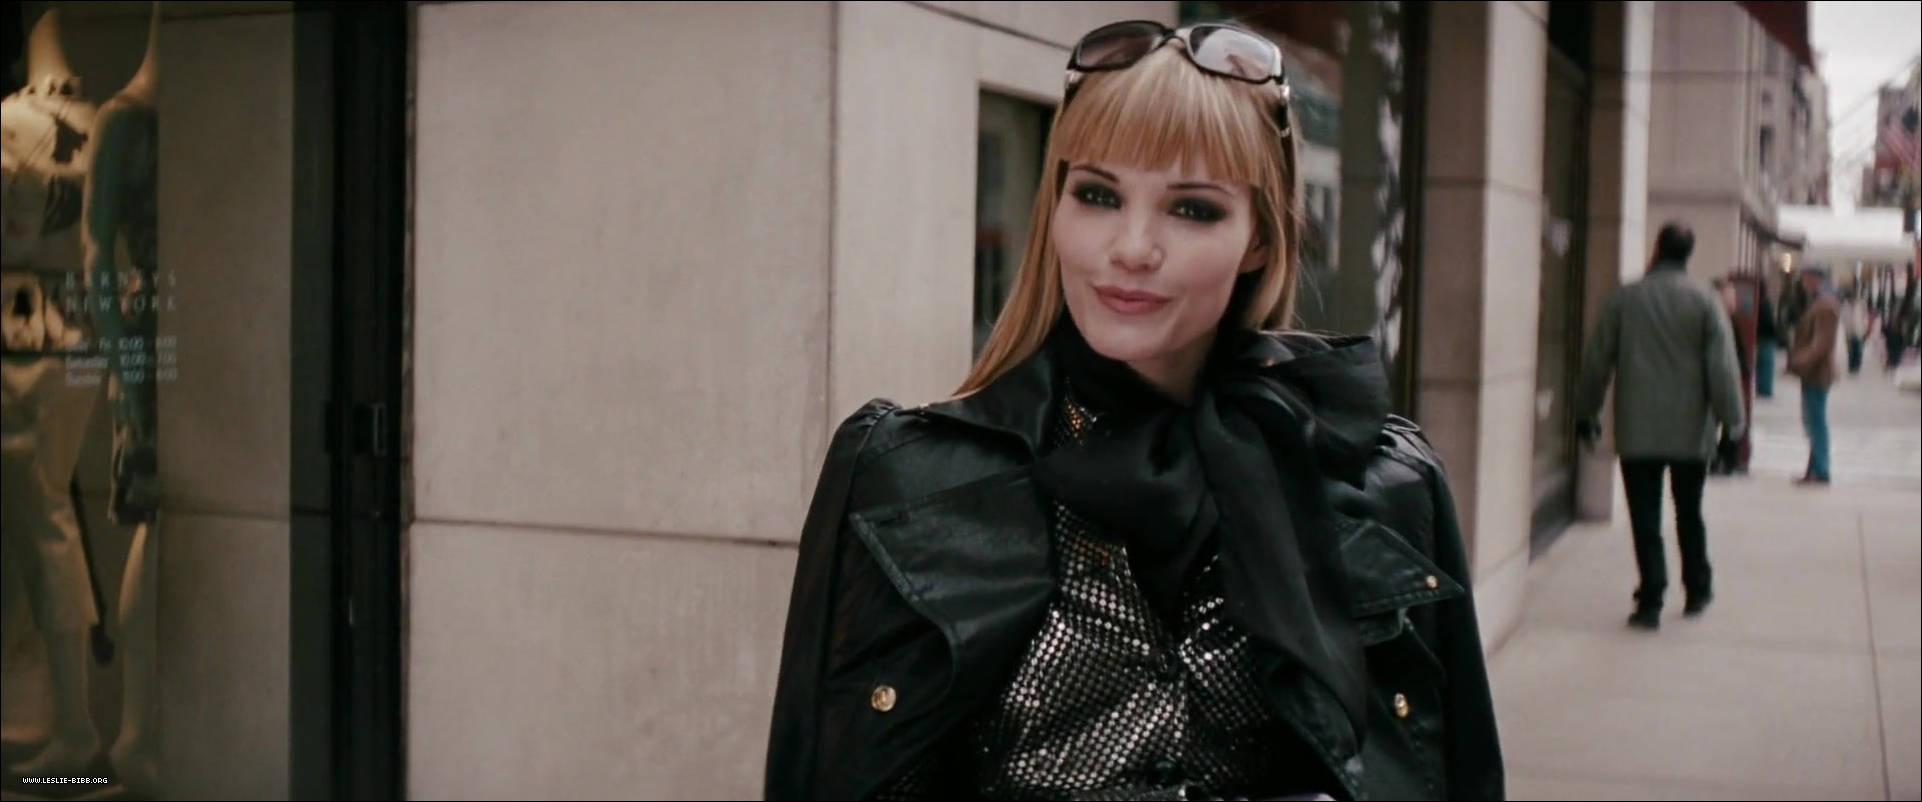 Leslie Bibb in "Confessions of a Shopaholic"